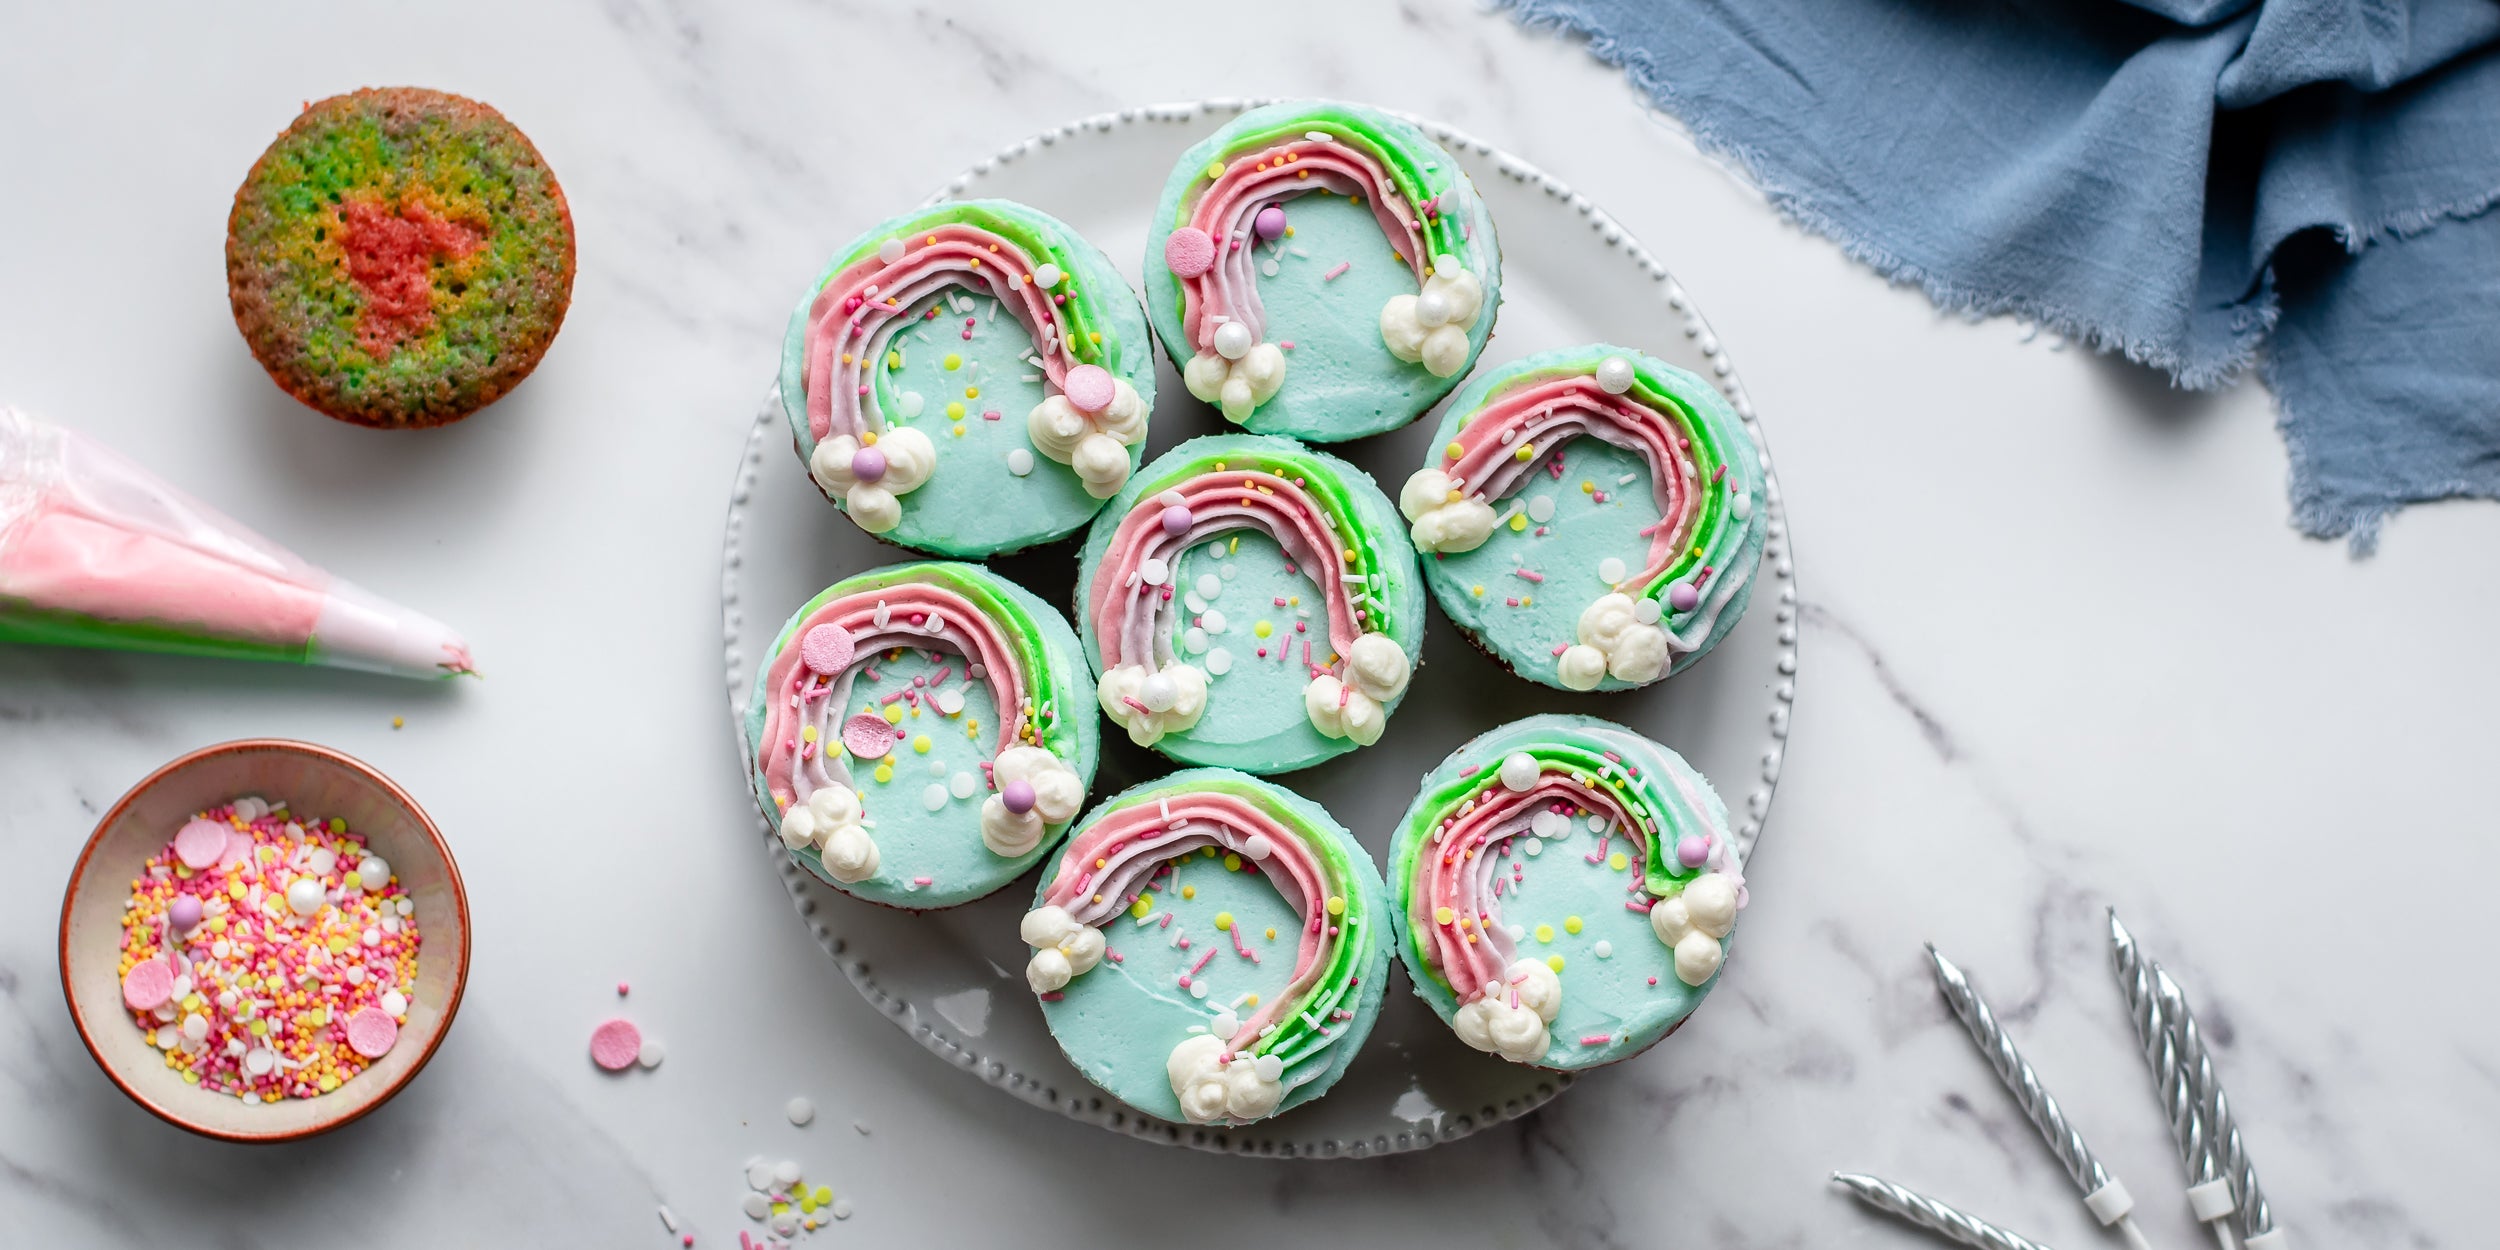 Overhead shot of 7 rainbow decorated cupcakes on a circular plate beside a piping bag, pot of sprinkles and plain cupcakes